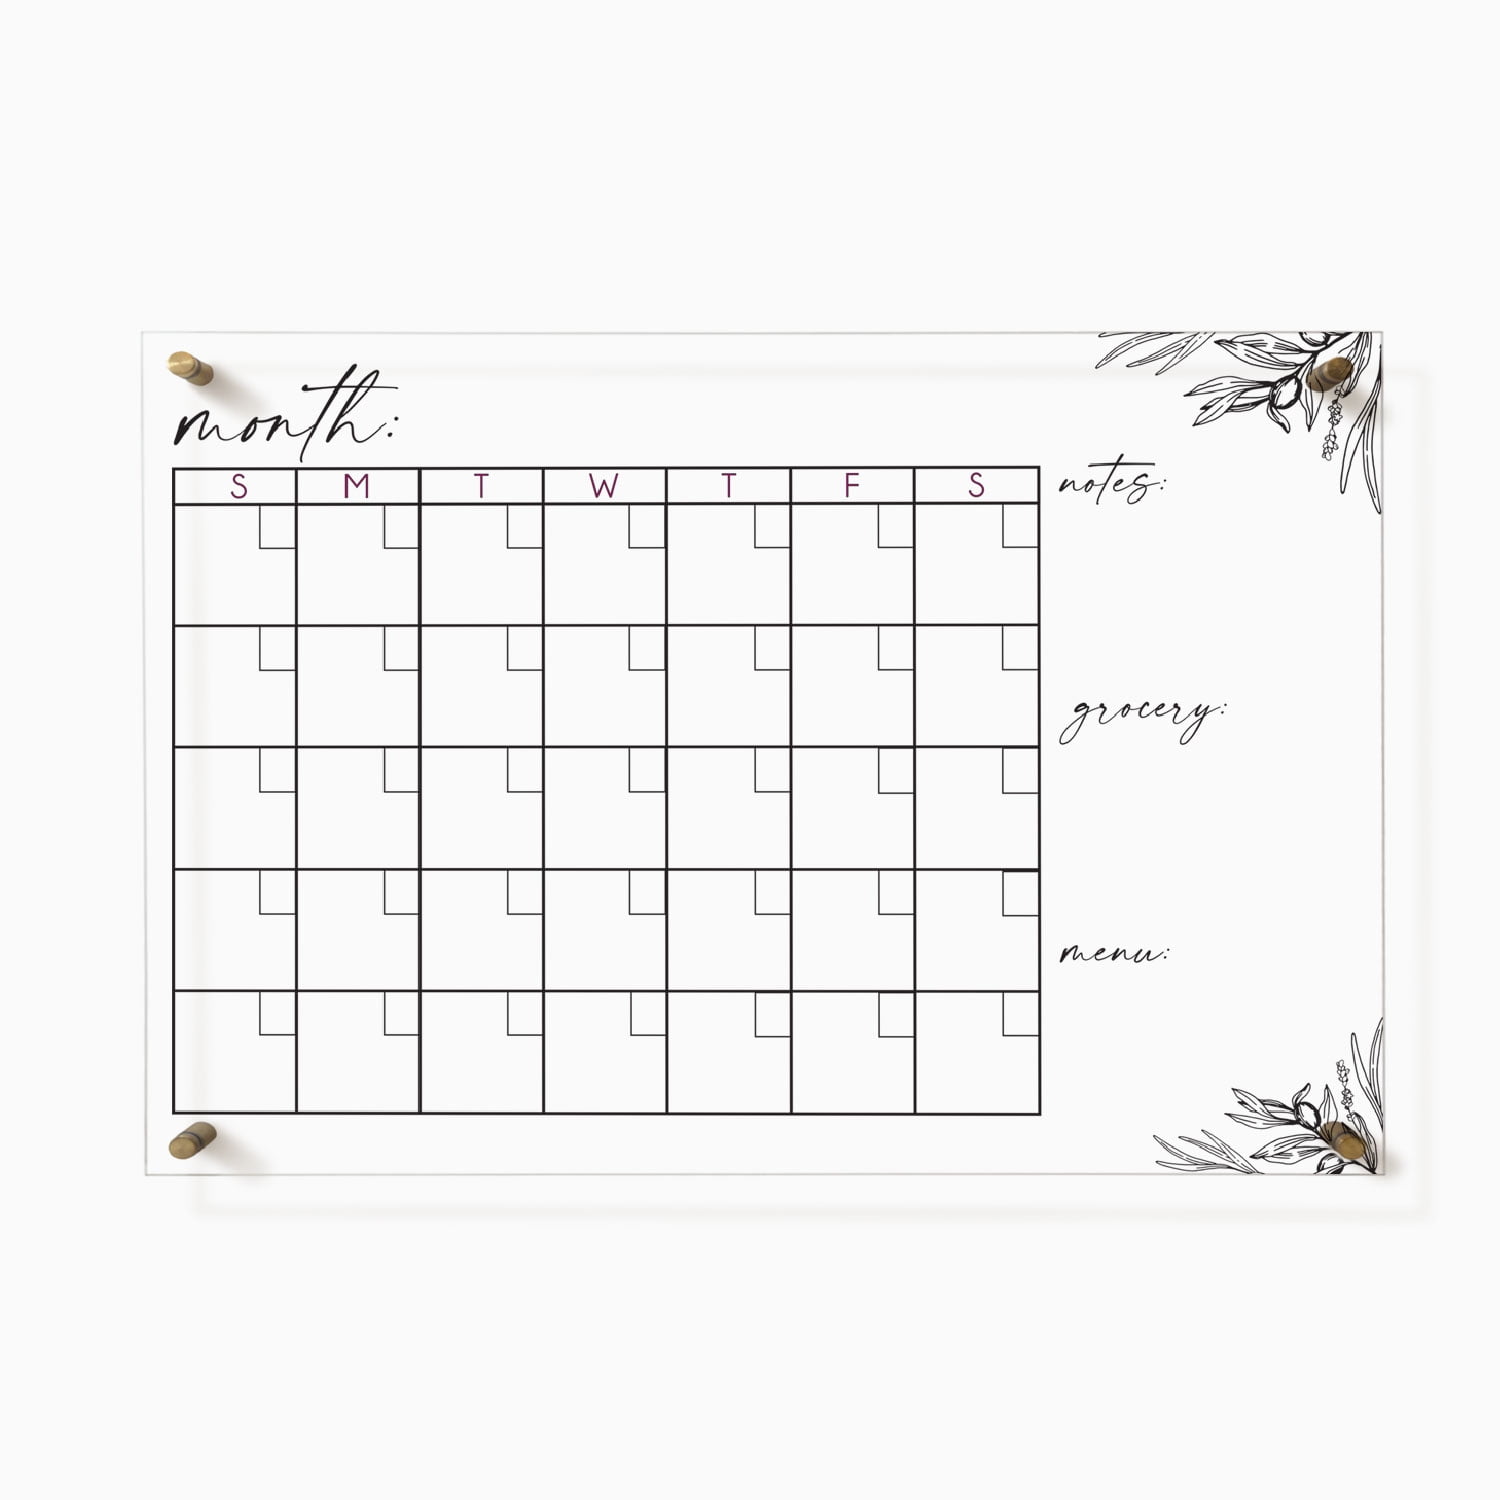 Page-A-Day Gallery Calendar 2020 CAT 6.25x7.25